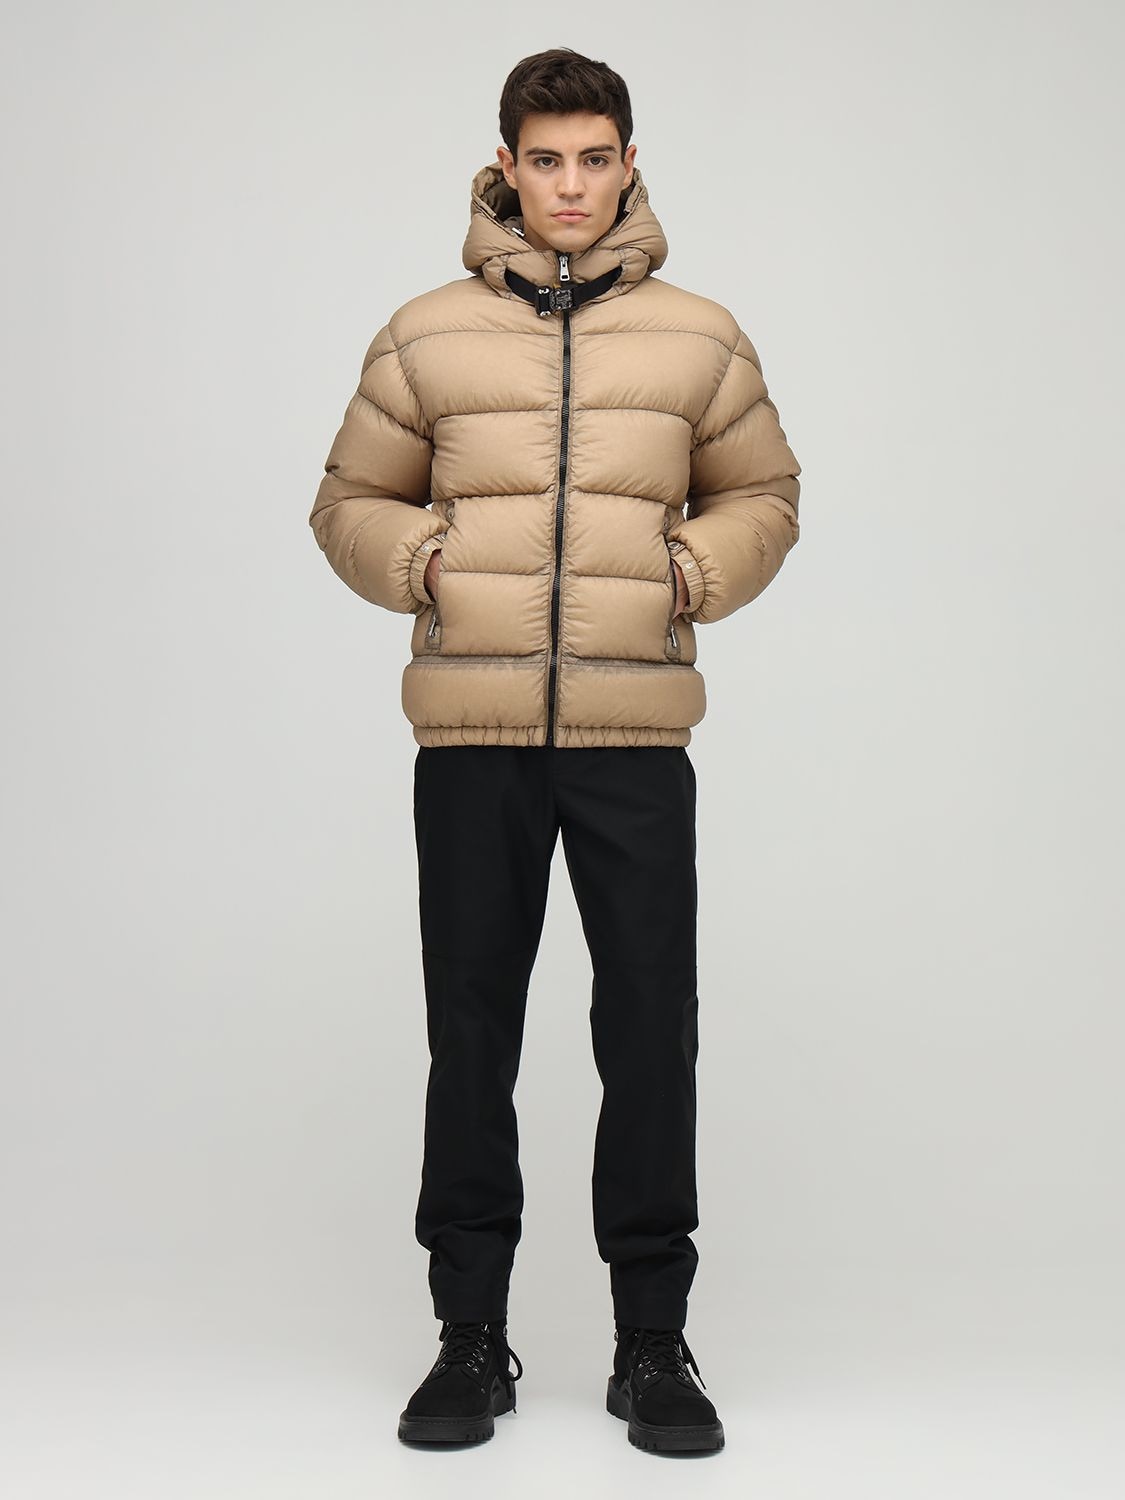 Moncler Genius X 6 1017 Alyx 9sm Almond Water Resistant Down Puffer ...